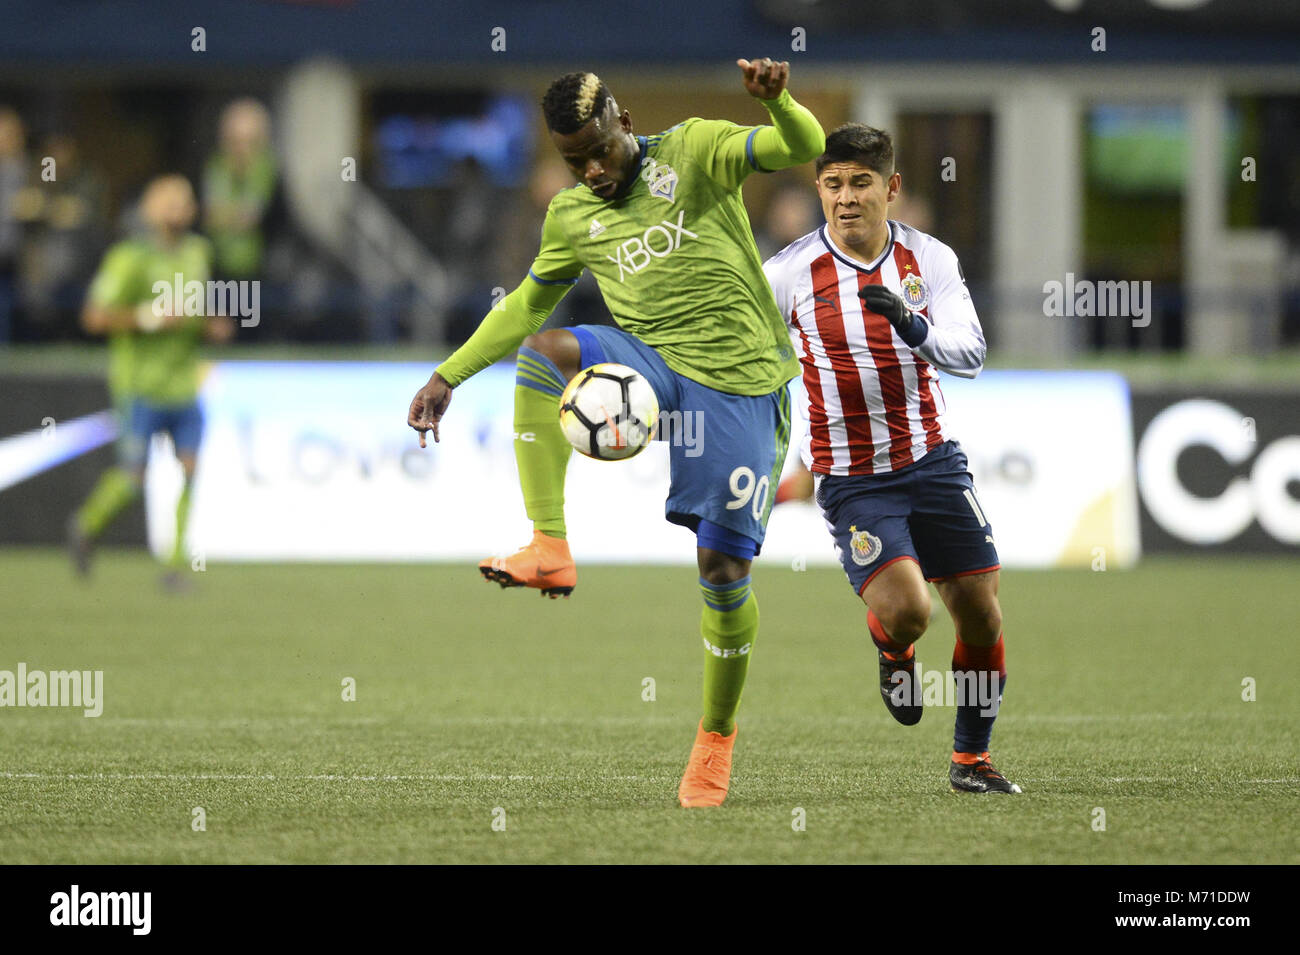 Seattle, Washington, USA. 7th Mar, 2018. CONCACAF Soccer 2018: Sounders defender WAYLON FRANCIS (90) tries to control the ball as Chivas Guadalajara visits the Seattle Sounders in a CONCACAF quarterfinal match at Century Link Field in Seattle, WA. Seattle won the match 1-0. Credit: Jeff Halstead/ZUMA Wire/Alamy Live News Stock Photo